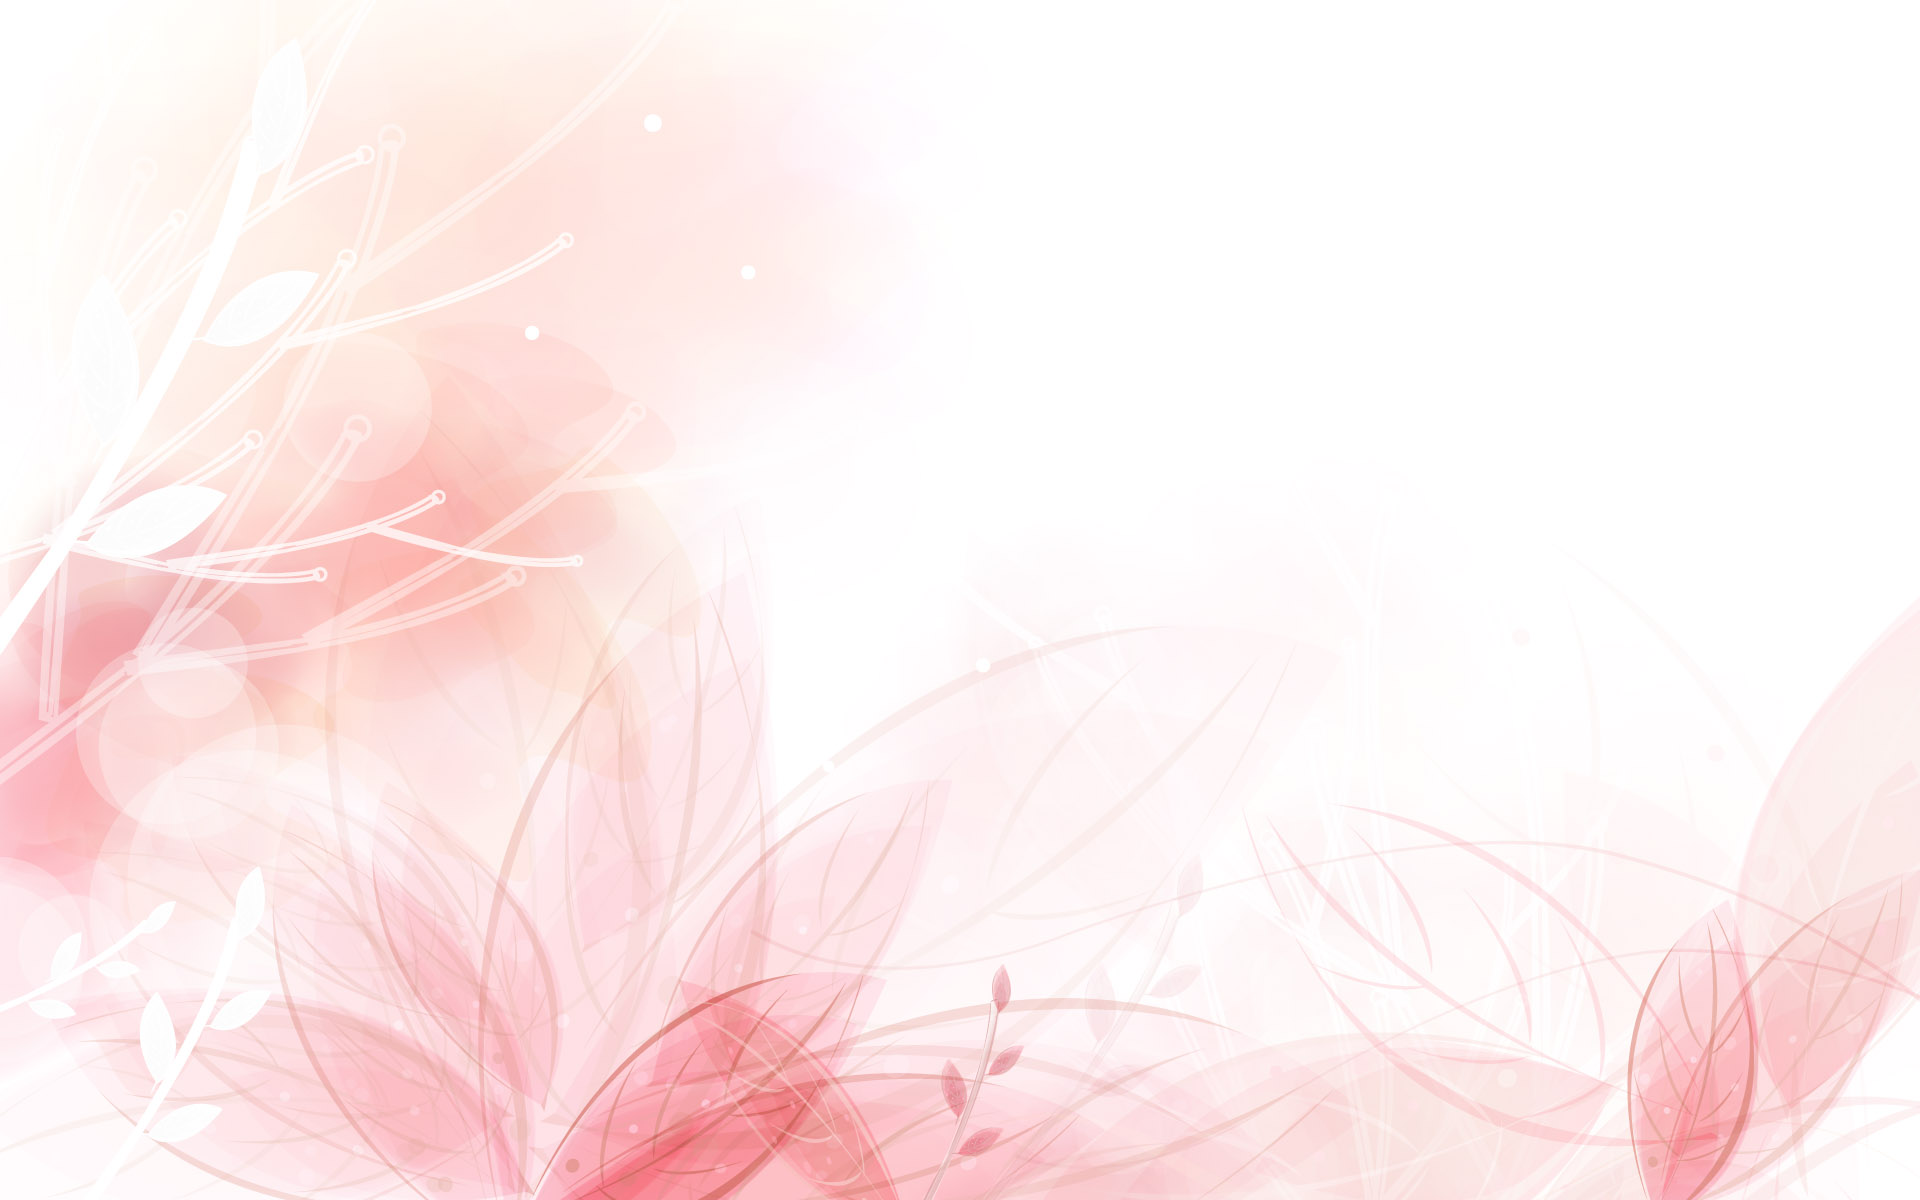 Light Pink Flower Background Image collections - Flower Decoration Ideas